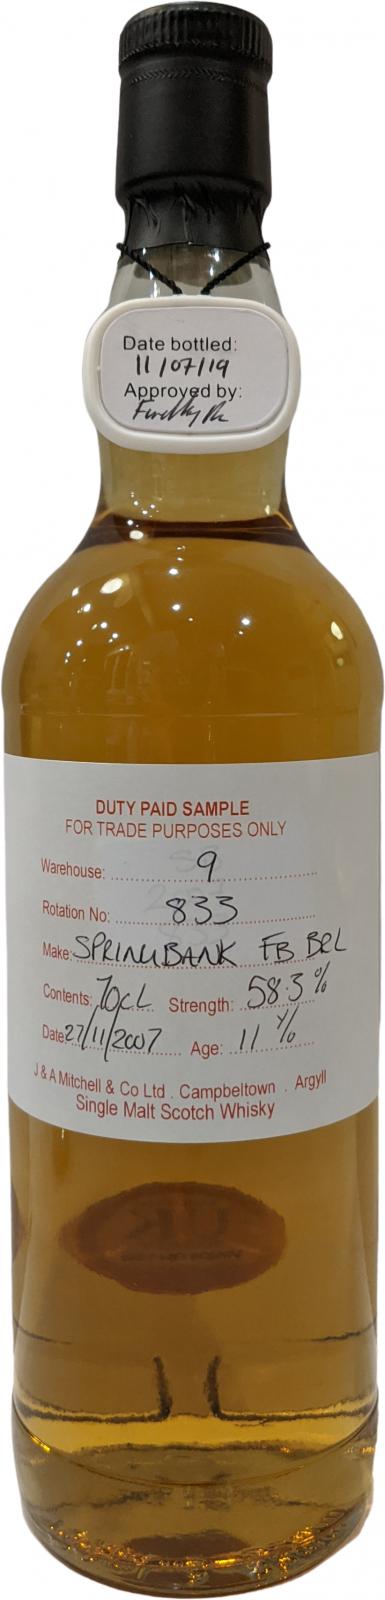 Springbank 2007 Duty Paid Sample For Trade Purposes Only Fresh Bourbon Barrel Rotation 833 58.3% 700ml